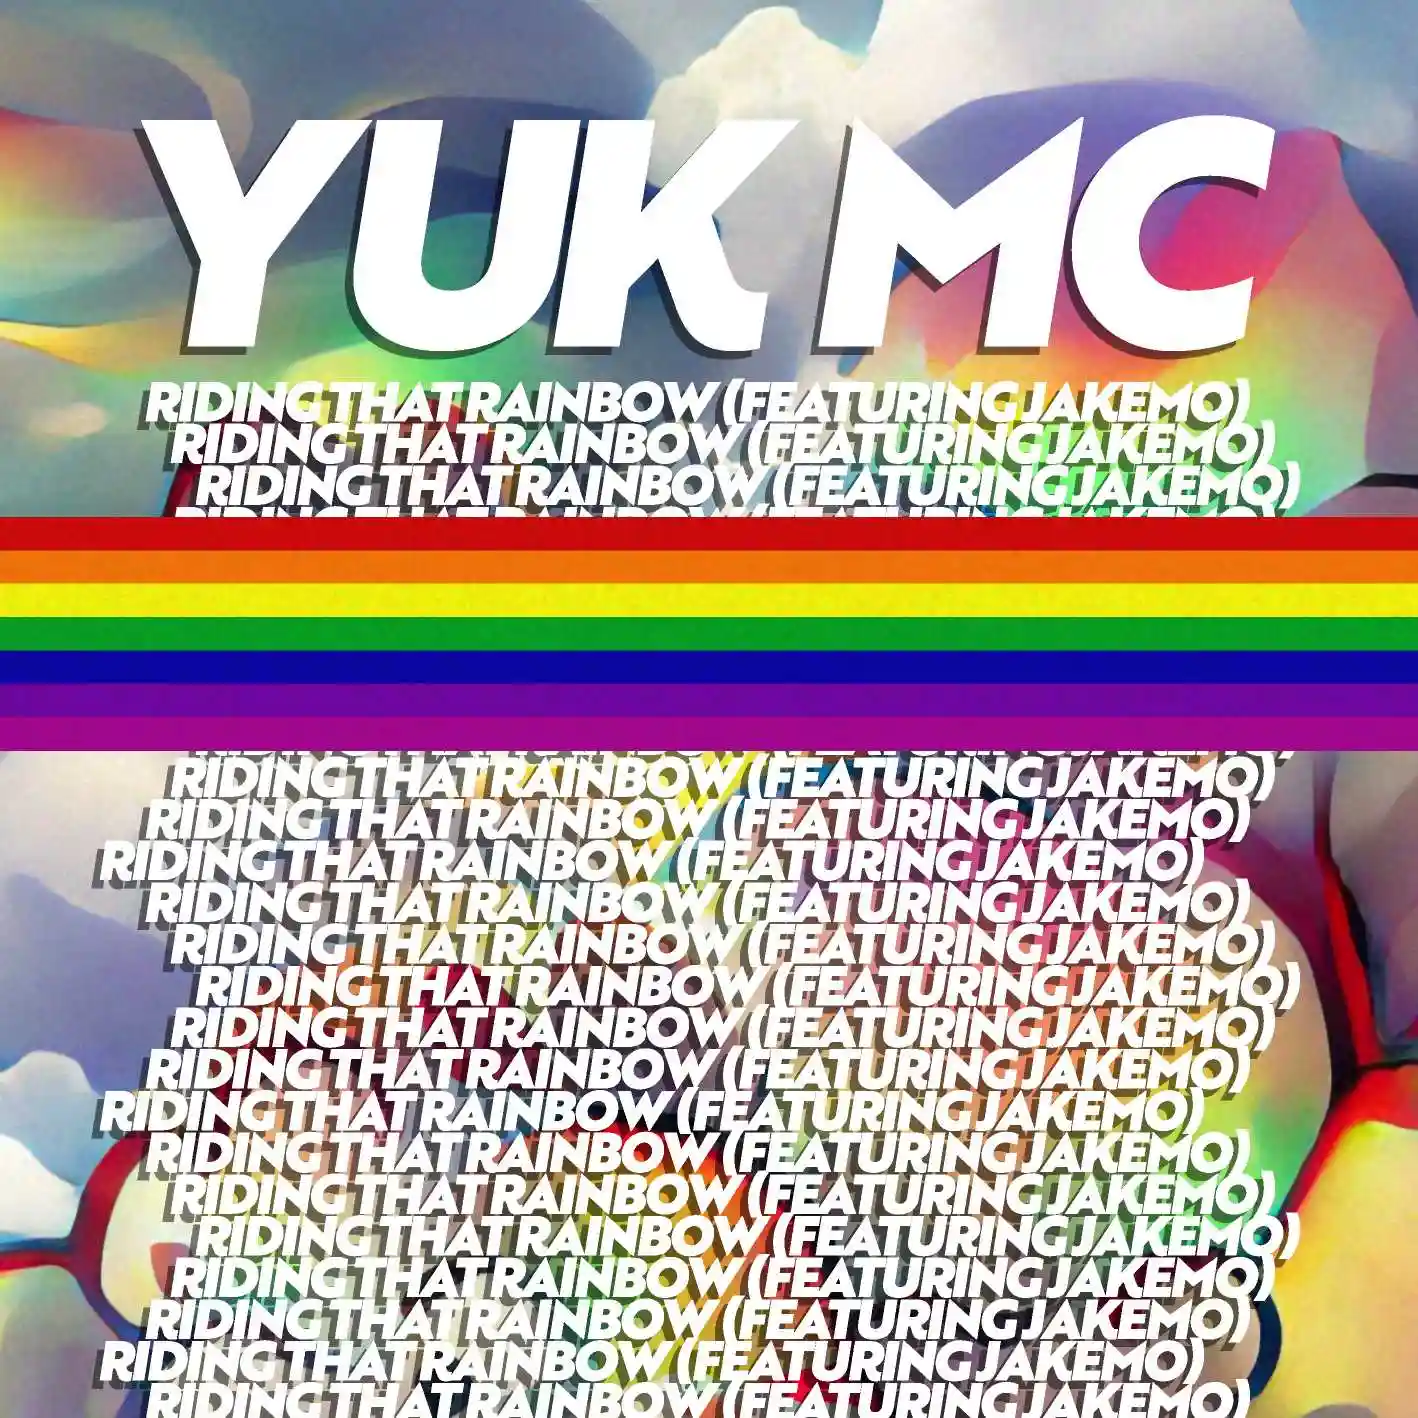 Album cover for “Riding That Rainbow (Featuring JakeMo)” by Yuk MC